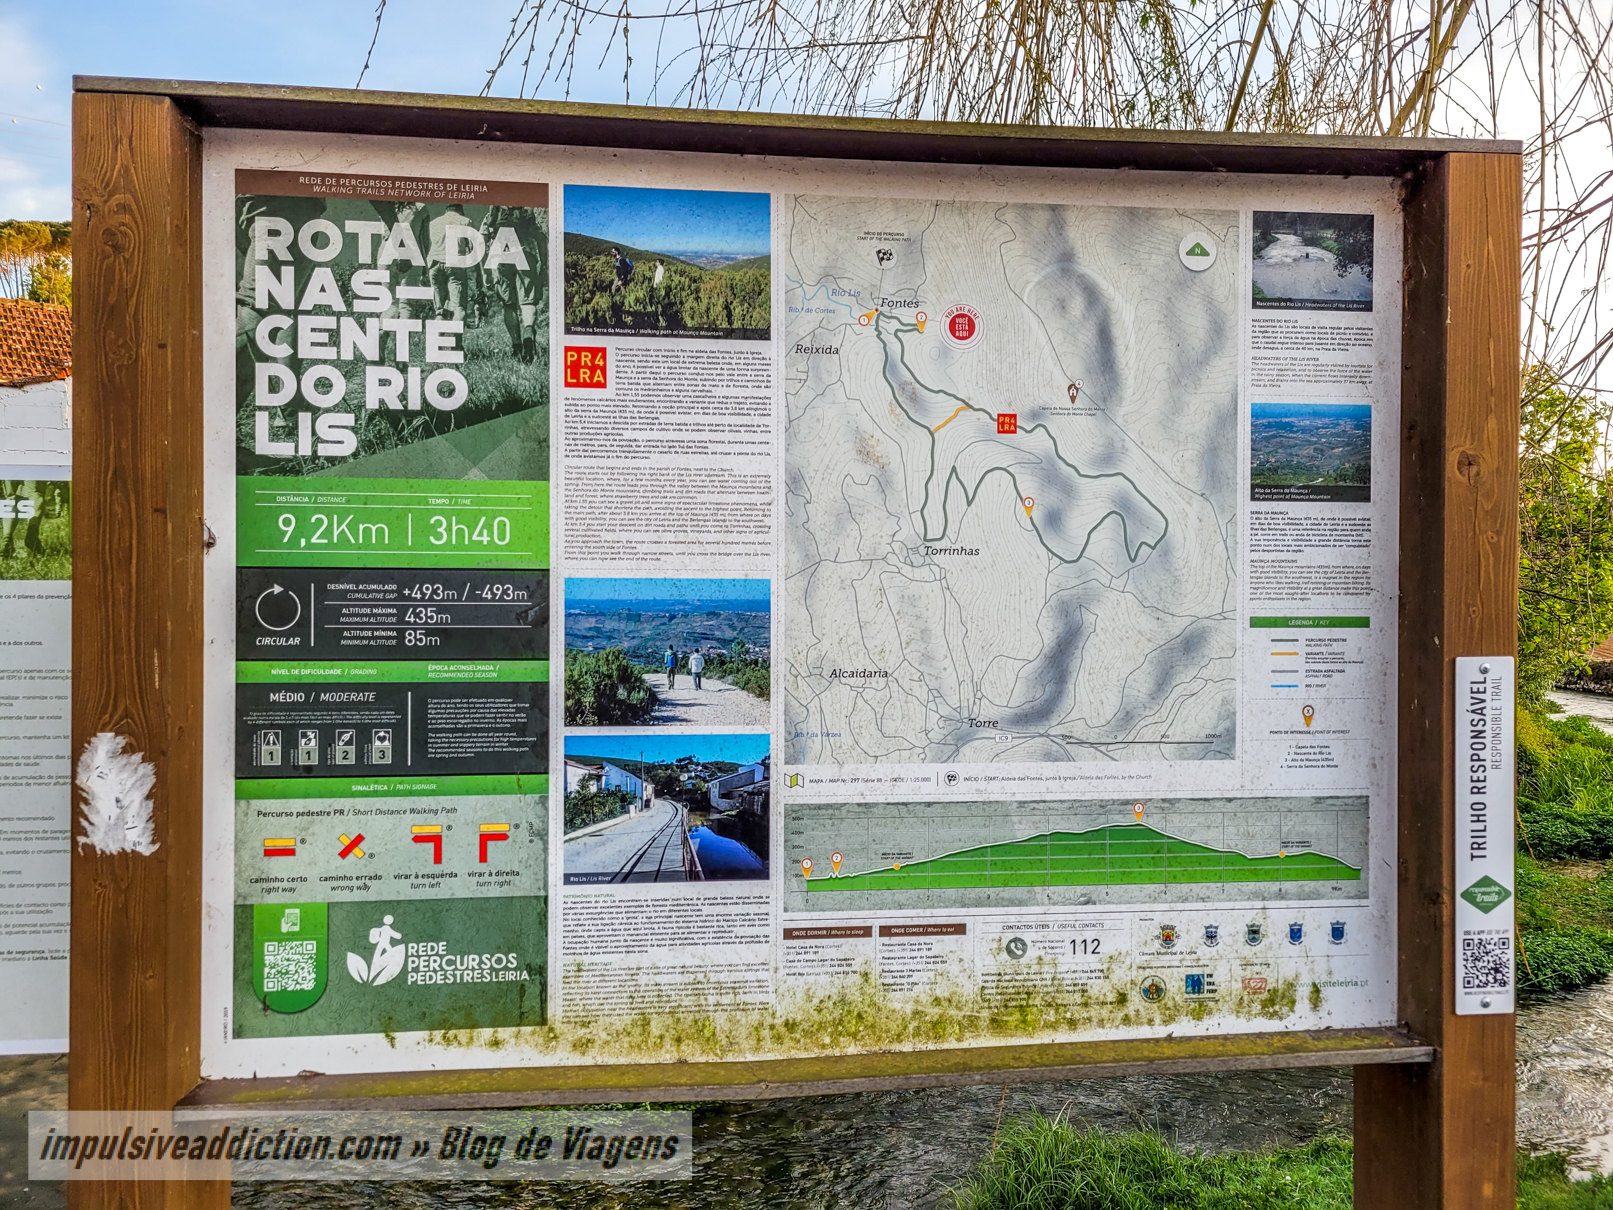 Information panel about PR4 Route